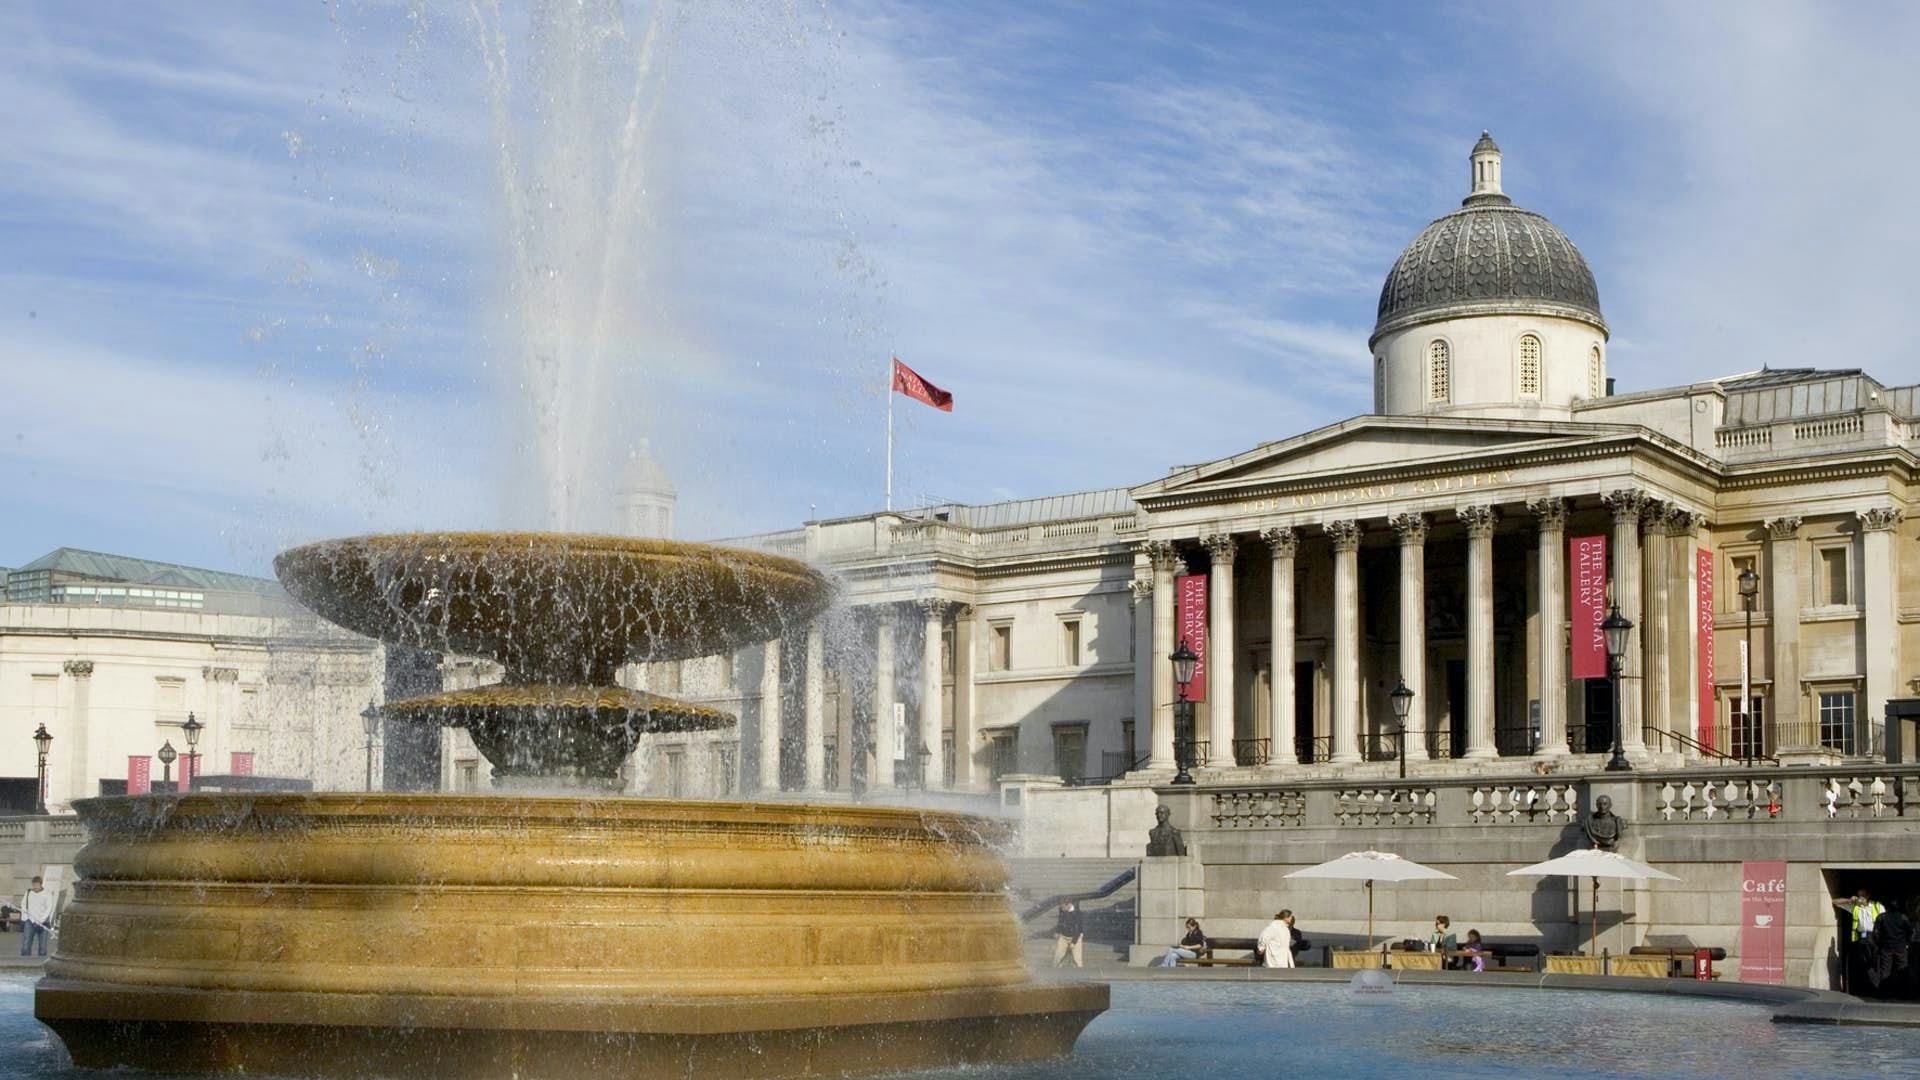 Trafalgar Square in foreground, gallery in background